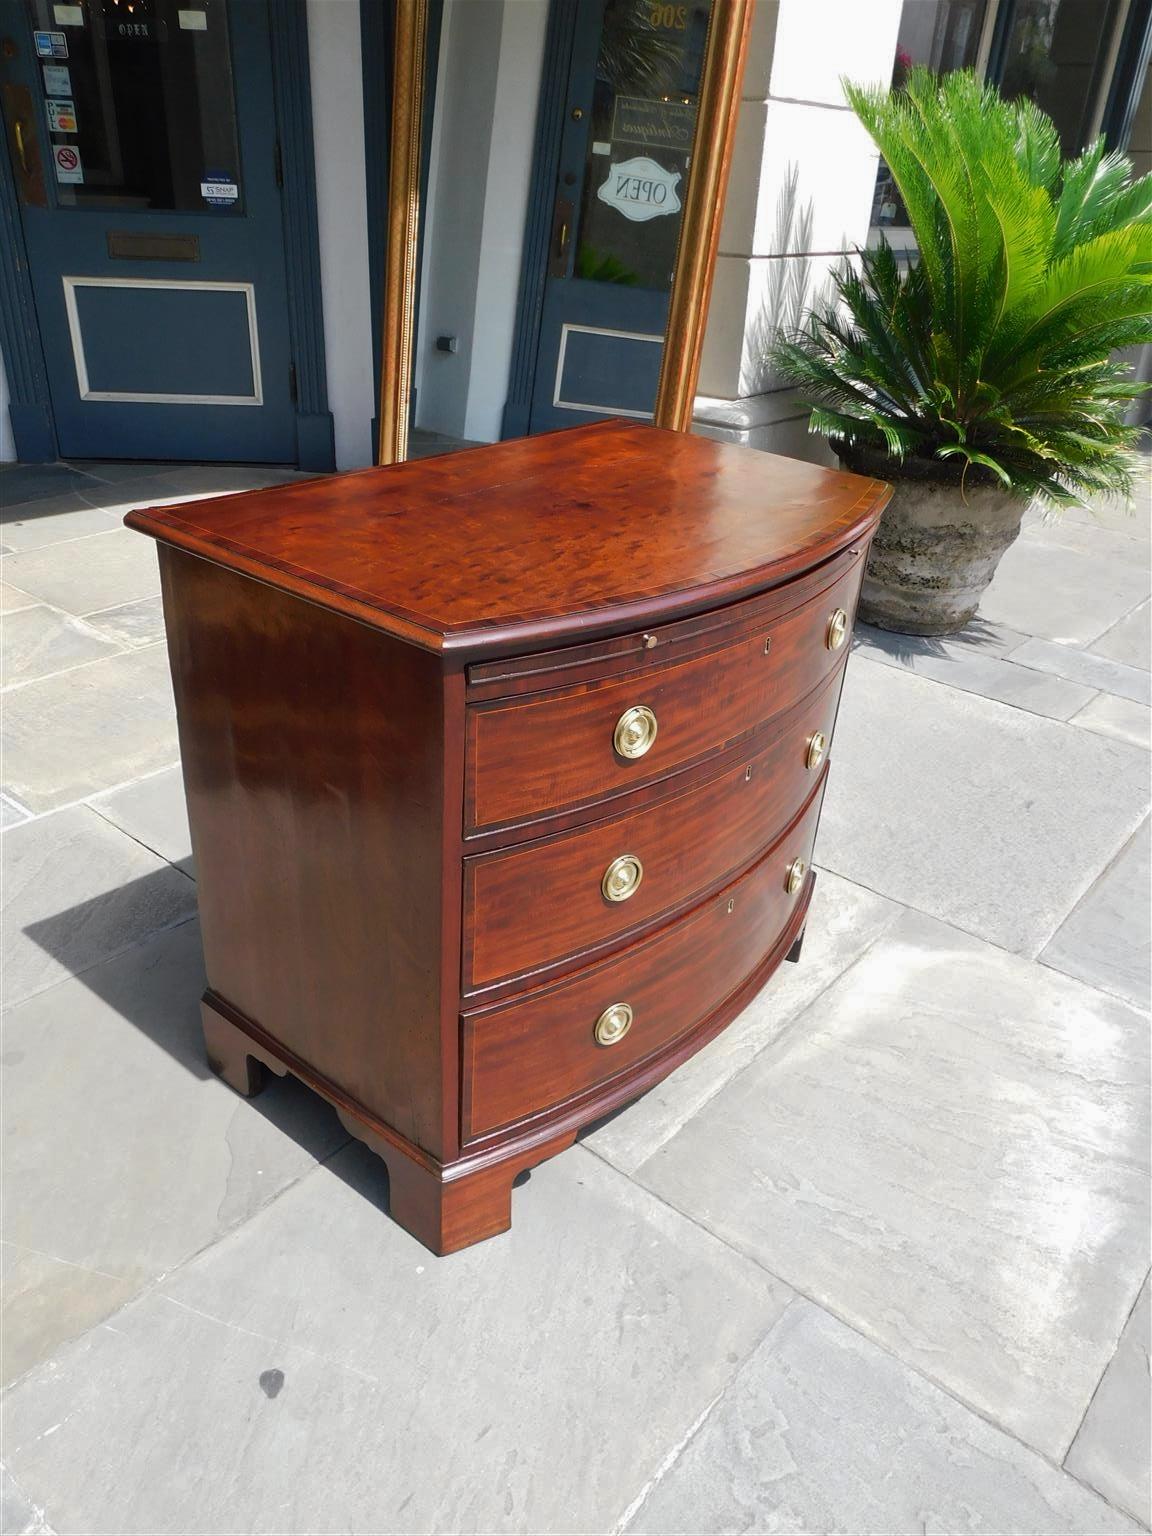 English Chippendale Mahogany bow front chest with three graduated drawers,  baize brushing slide with original brass pulls, satinwood string inlays, tulip wood cross banding, original brasses and interior locks, and resting on the original ogee